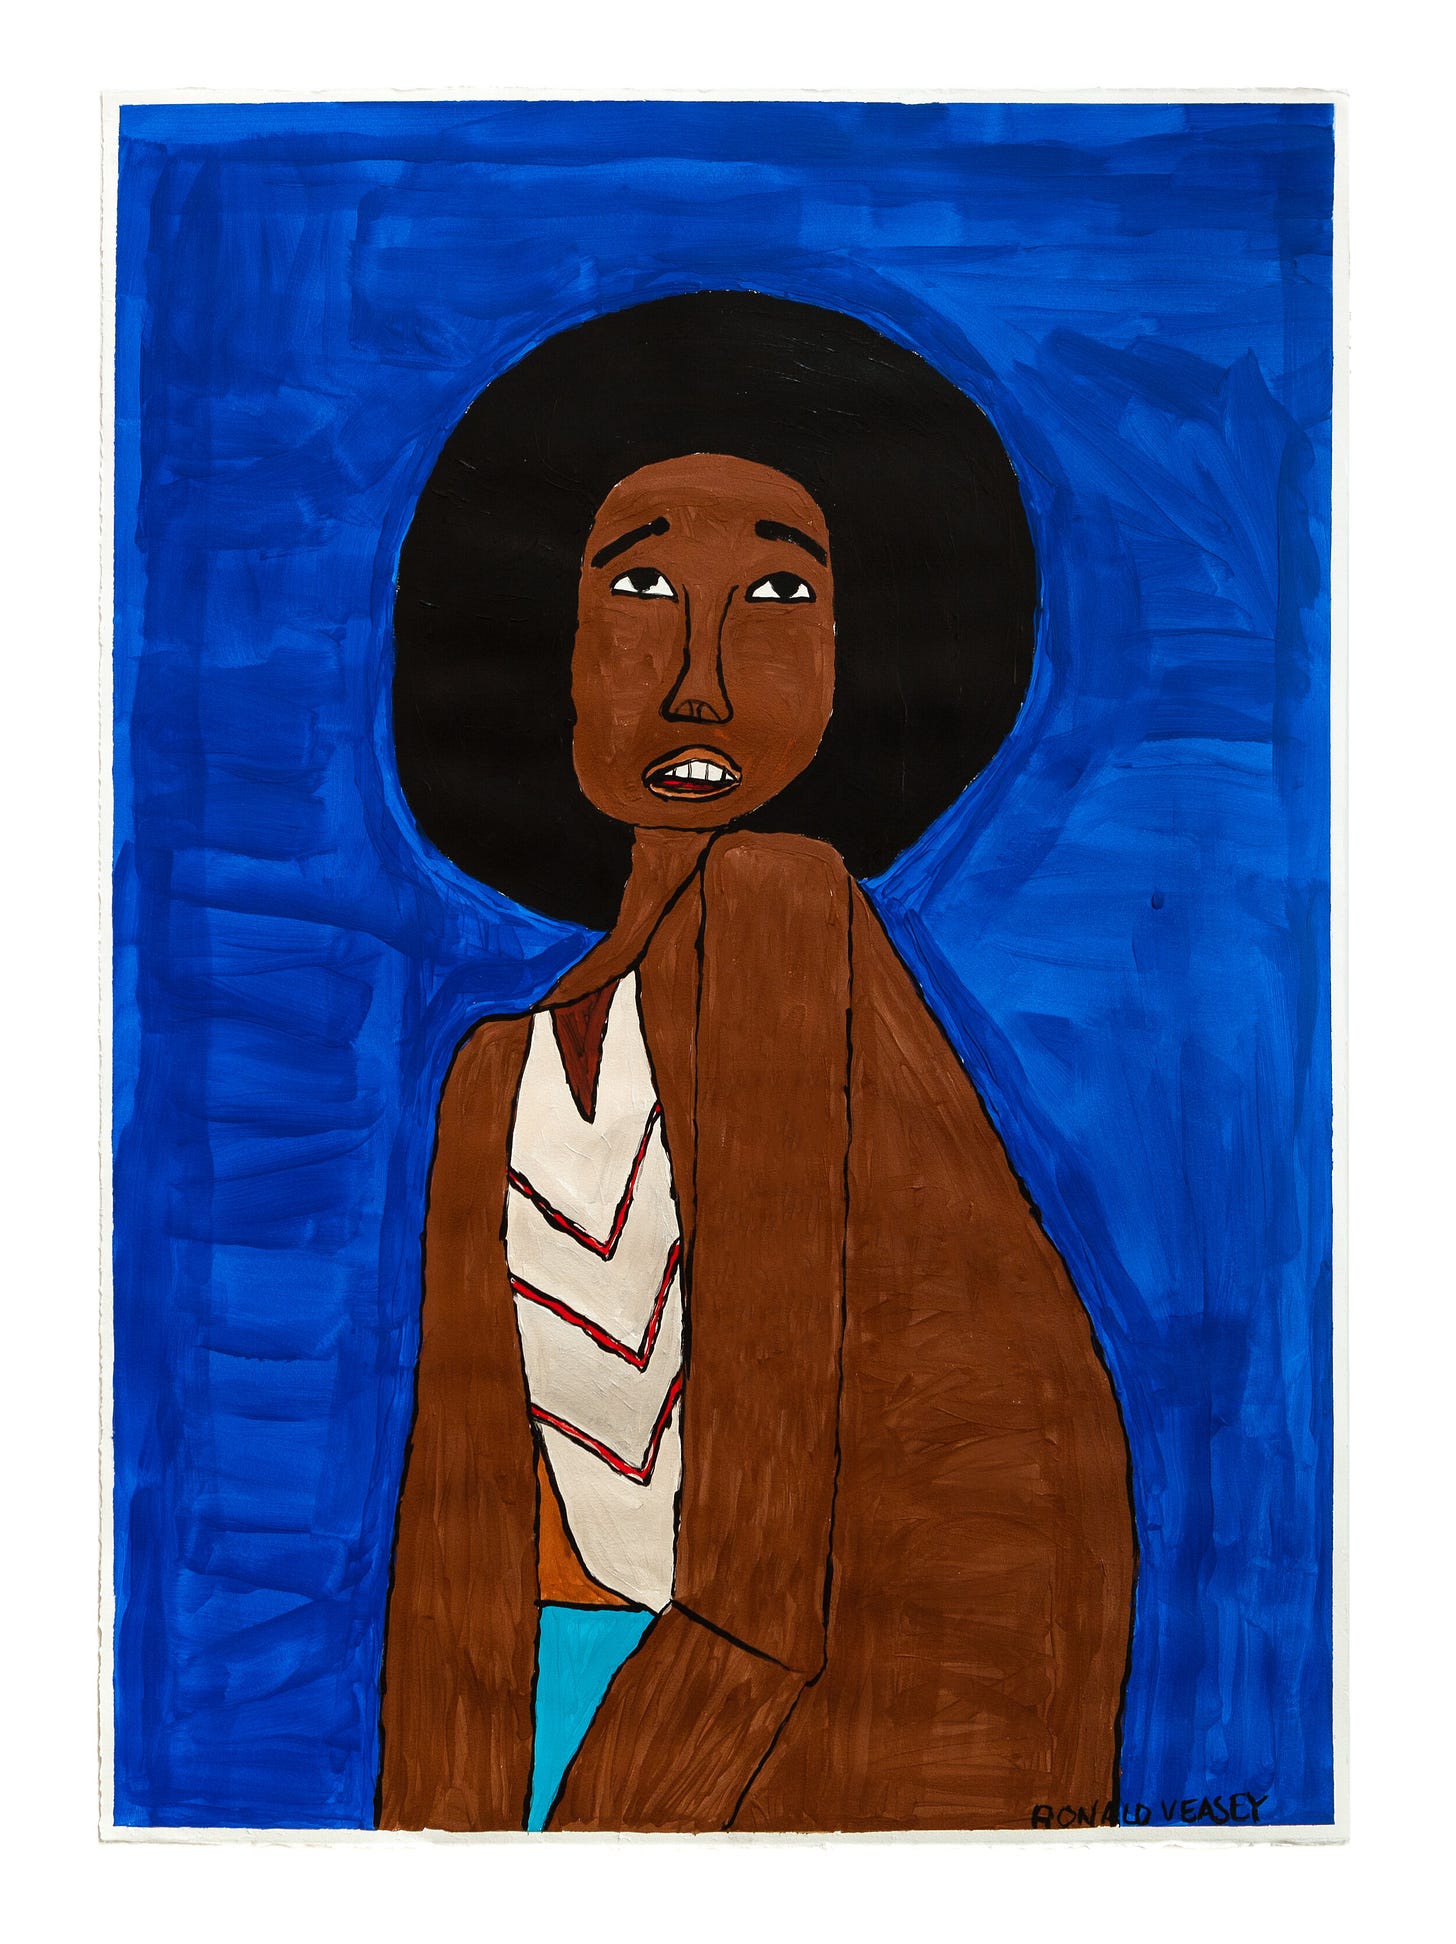 Ron Veasey, Untitled (RVe 298), 2021, 30.25x44 inches, acrylic on paperA portrait of a Black woman with an afro and a striped shirt, slightly hunched over as she gazes upward. The background is a wash of royal blue.